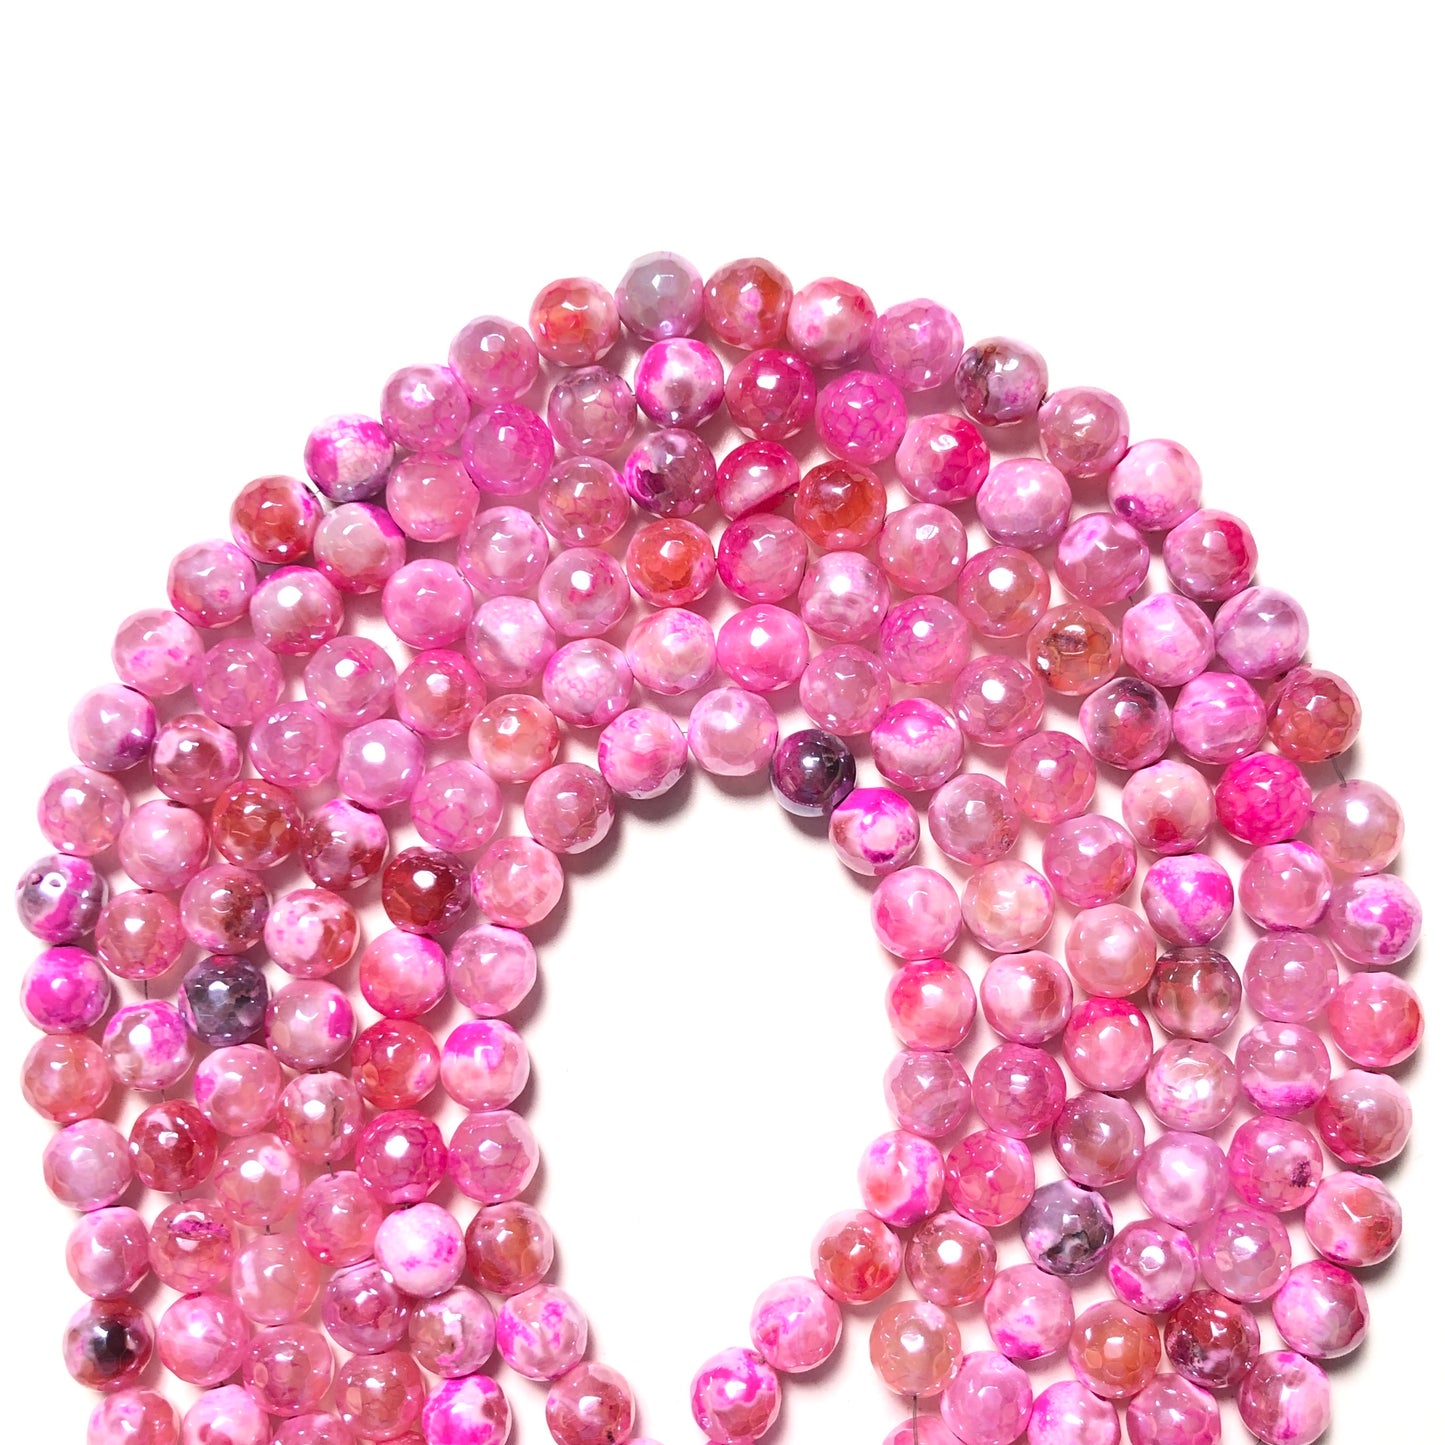 2 Strands/lot 8mm Electroplated Pink Fire Agate Faceted Stone Beads Electroplated Beads Breast Cancer Awareness Electroplated Faceted Agate Beads Charms Beads Beyond